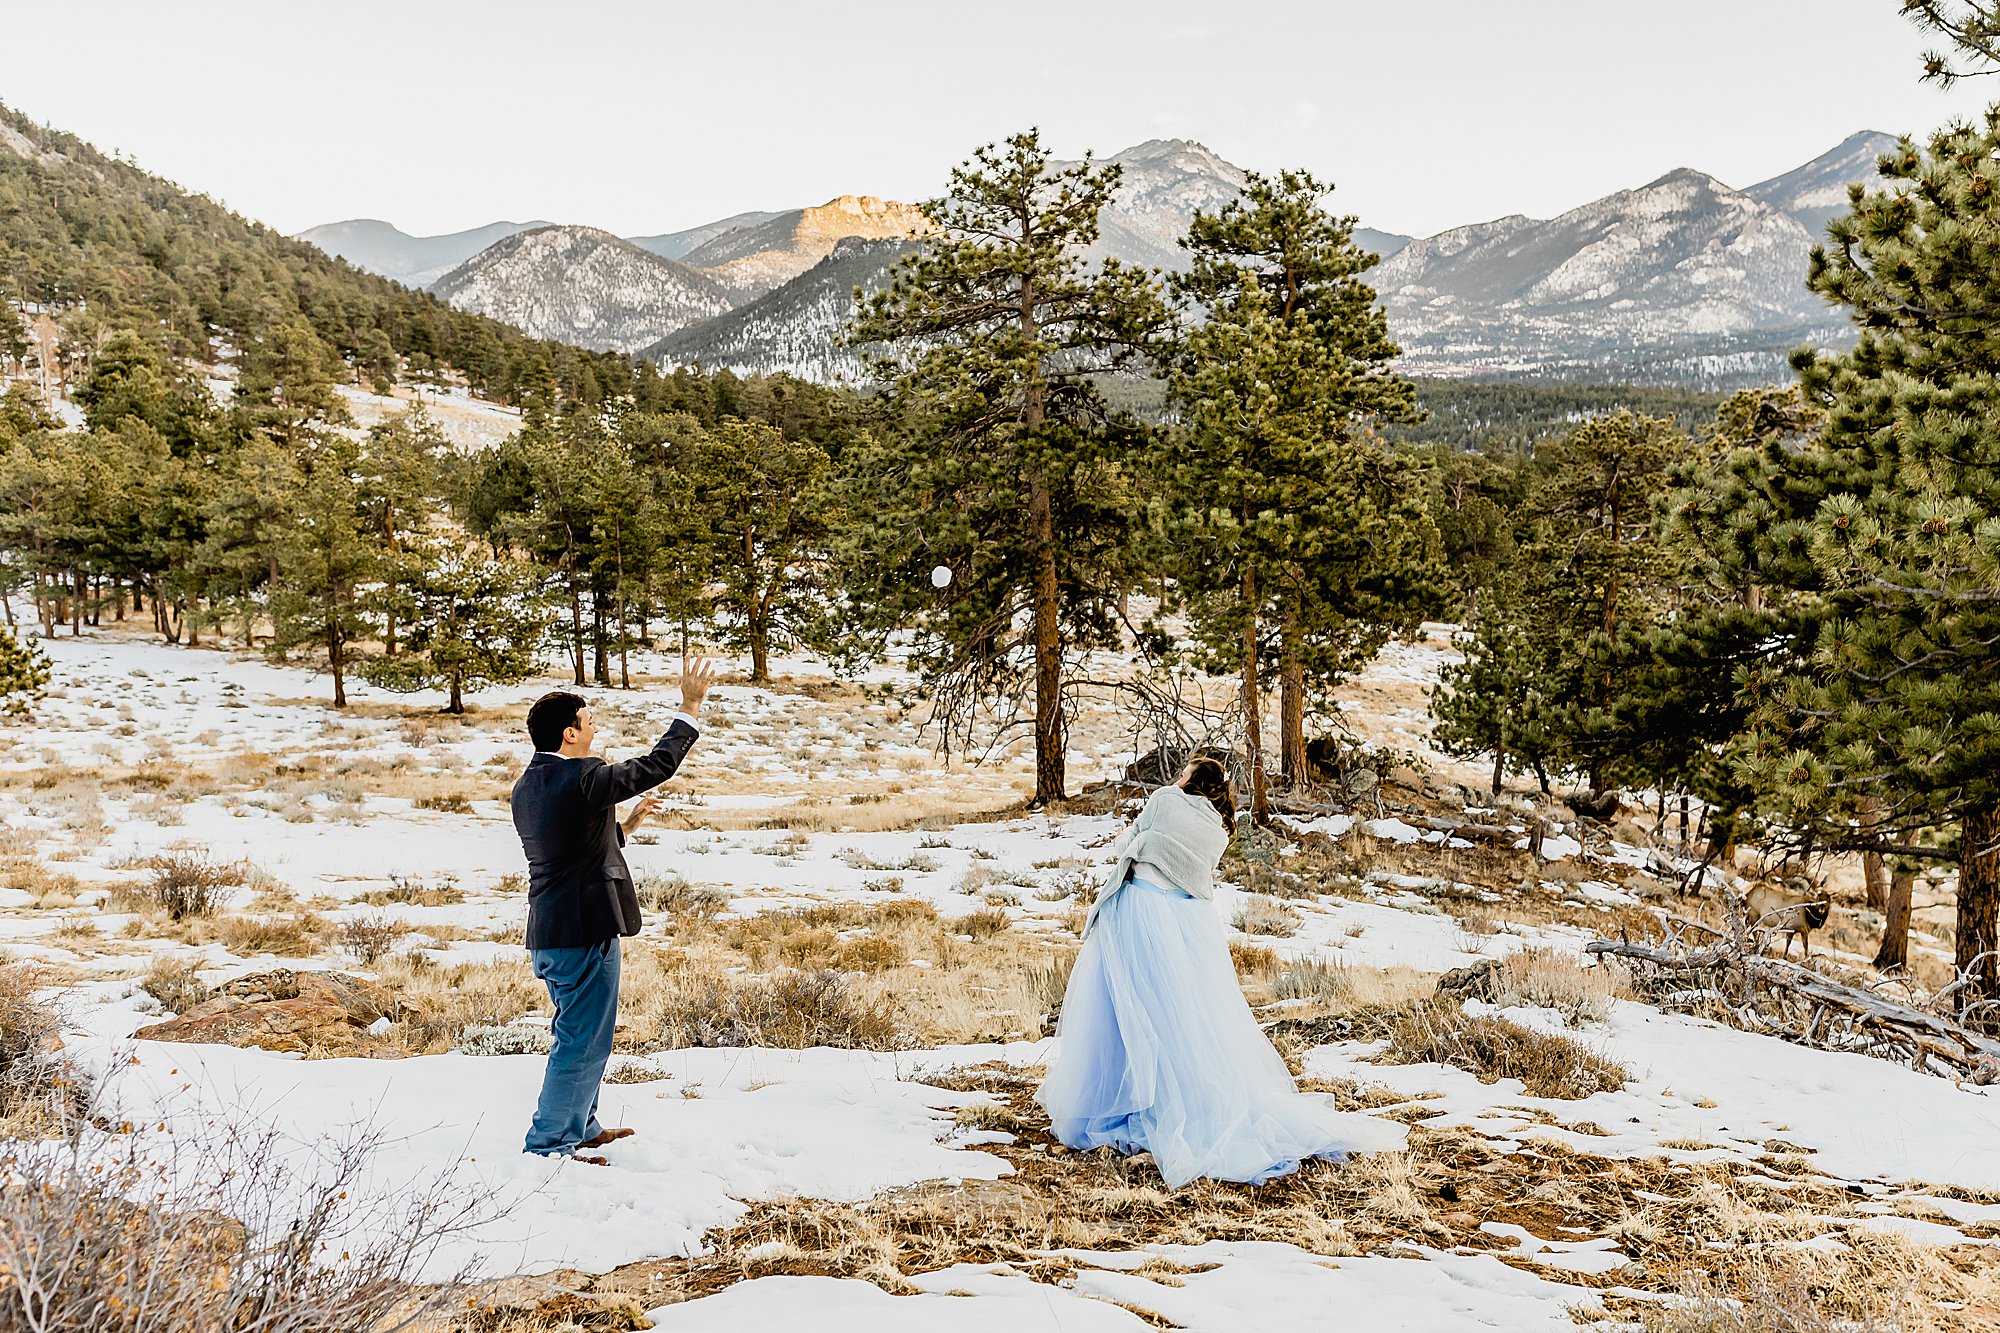 Couple has snowball fight in rocky mountain national park for their winter elopement